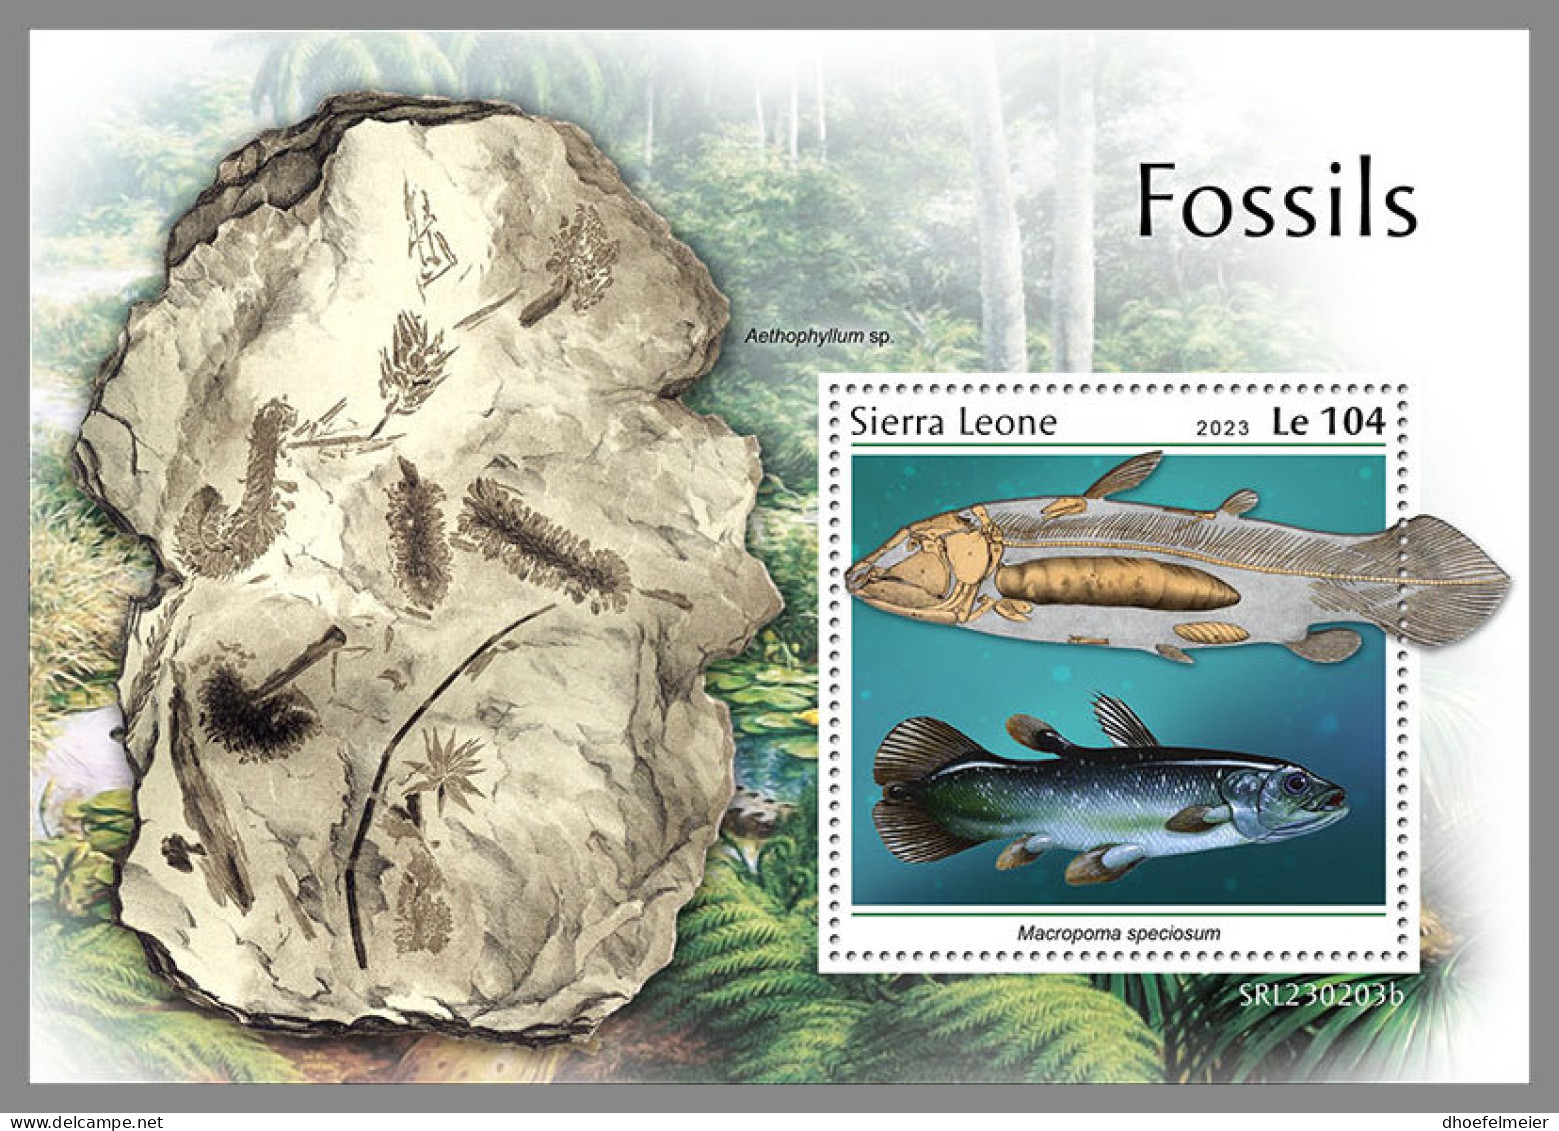 SIERRA LEONE 2023 MNH Fossils Fossilien Fossiles S/S - OFFICIAL ISSUE - DHQ2334 - Fossielen